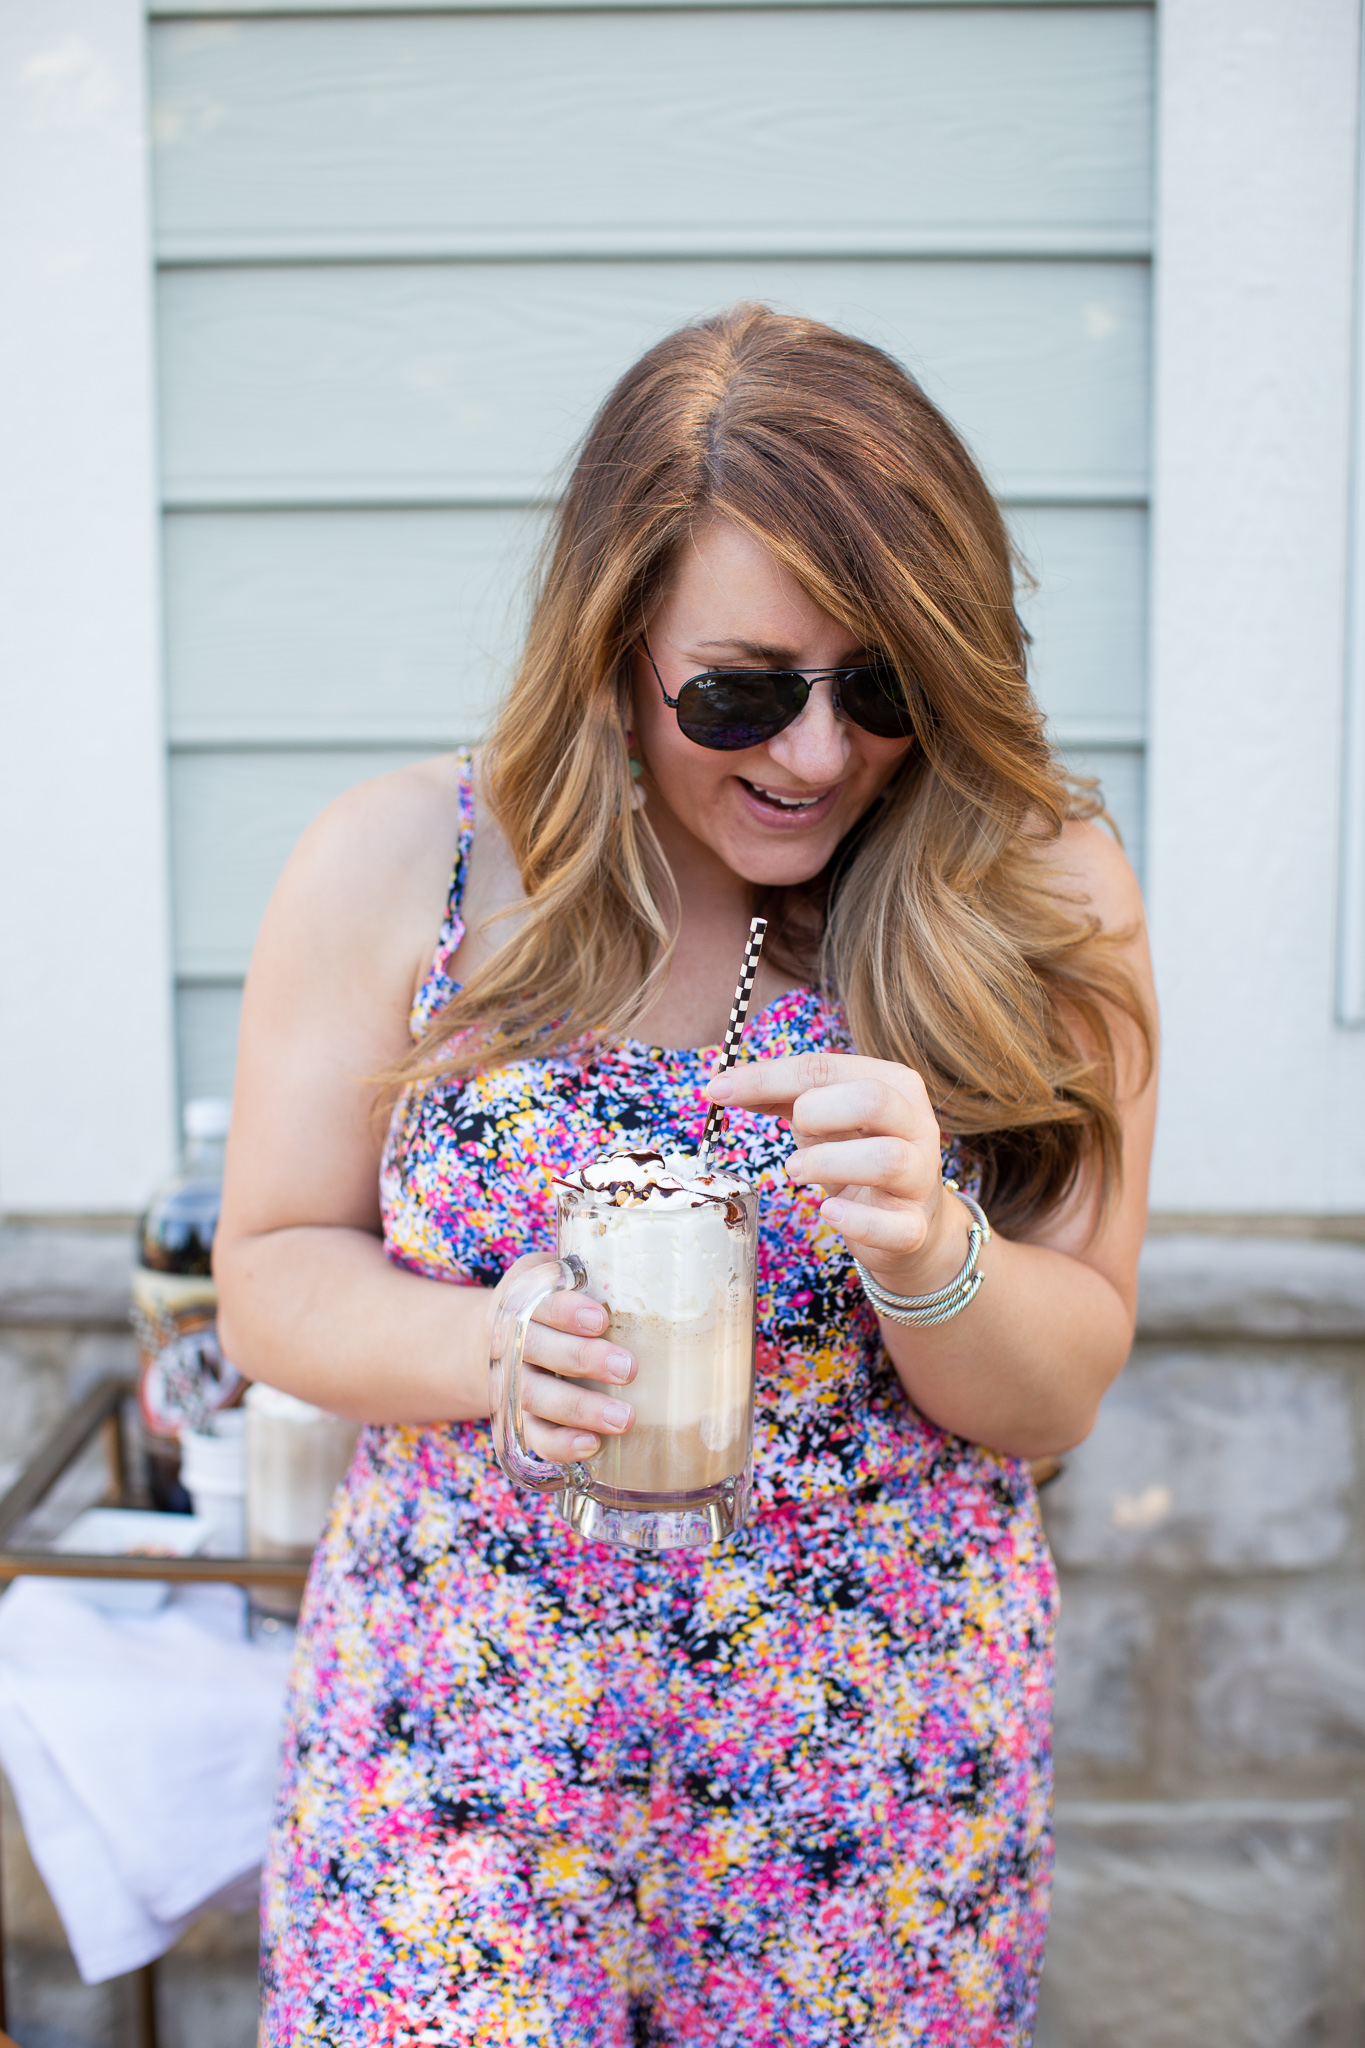 Summertime Root Beer Float Bar featured by popular North Carolina lifestyle blogger Coffee Beans and Bobby Pins